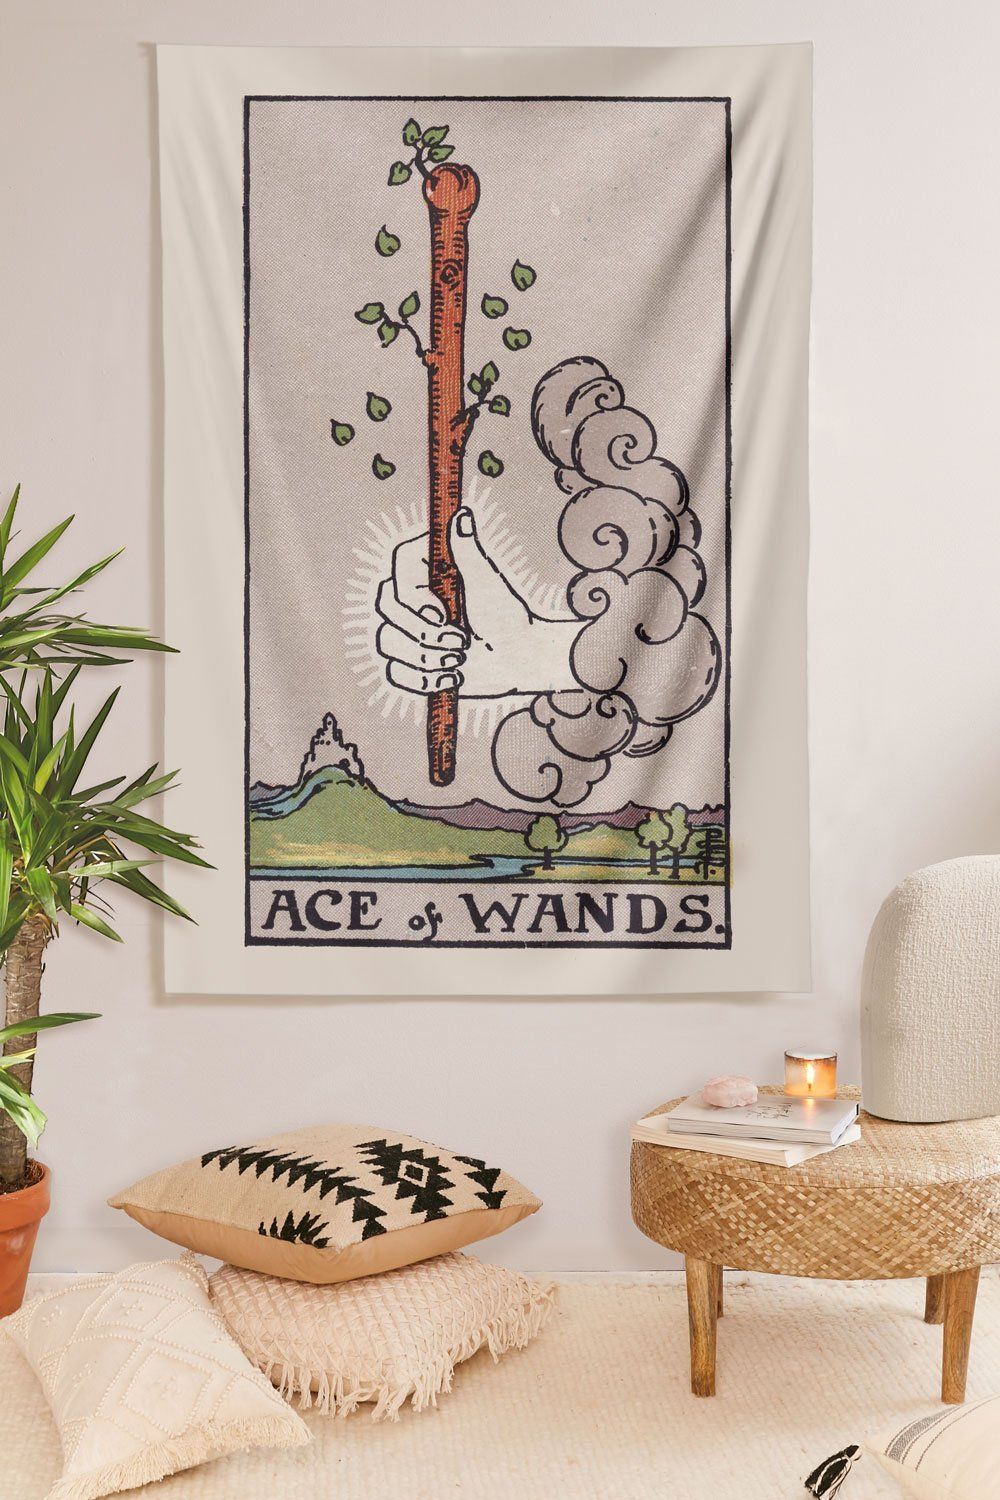 Ace of Wands Tapestry tapestry NirvanaThreads 